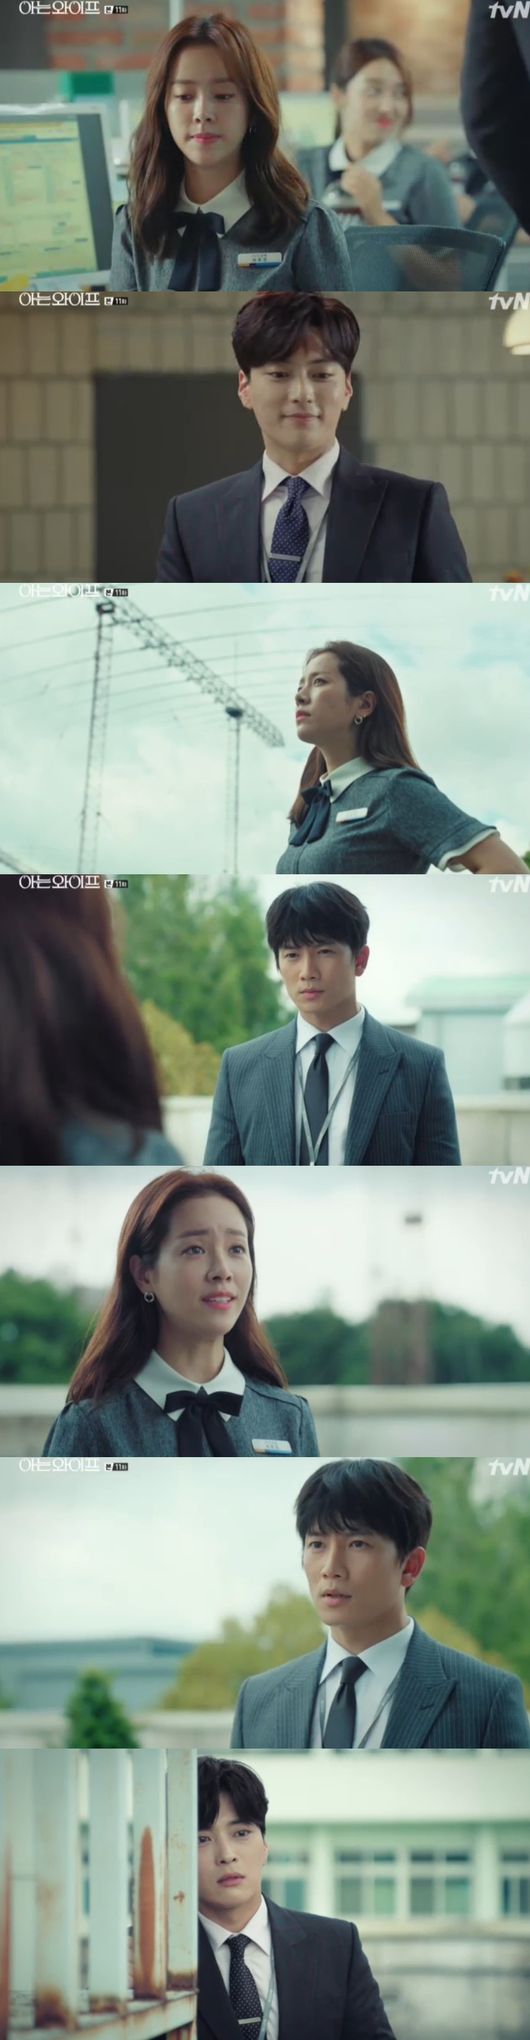 In Knowing Wife, Confessions made it clear that Ji Sung was a former couple to Han Ji-min.In the TVN drama Ai is a Wife (directed by Lee Sang-yeop, played by Yang Hee-seung), which was broadcast on the 5th, Joo-hyuk (Ji Sung), who revealed everything to Woojin (Han Ji-min), was drawn.On this day, Woojin learned his mind toward Juhyeok. Woojin borrowed his strength from alcohol and conveyed his mind in a careful manner.Though he said he liked it with tears, Joo Hyuk refused Woojins mind, saying, No, we cant. At this time, Woojin pulled Joo Hyuk and kissed him.Ju-hyeok did not refuse it without knowing it. At this time, the spirited Ju-hyeok ran away with his lips We are not.Joo Hyuk kept thinking that he would go back to Woojin.After the end, I had dinner with Woojin, and Woojin spoke Carefully, saying that I had to say a little frankly.Woojin said, I do not think I can meet my agent anymore. I am a good person, but I know my head, but I keep seeing the wrong place.I can not do it now, he said, I am sorry that I did not start from the beginning. After the end, he laughed, saying, I asked you to meet me for a month and decide.I did not commit a crime to die, and if men and women do not fit, I can break up, he said. I was kicking, tea, and so on. He naturally suggested that I go back to my comfortable colleagues.Woojin sighed on the roof, and Joo Hyuk looked at it.Please think about it again after the end, he said. Anyone who really likes Mr. Woojin, if it is because of that day, can make a mistake.But Woojin said, It is not a mistake. I do not want any answers, I have just been through a hard time, and I know how close you are, so please do not force me to do anything else.Ju-hyeok did not answer.Woojin continued, Do not be too uncomfortable, if you are uncomfortable, do not make that kiss any meaning, he said. I am a drunken person like you said.The last who came up on the roof was shocked to hear this conversation.Ju-hyeok, who did not have Ali, noticed the extraordinary end of the day. He asked what was going on, and the end of the day punched him.How can you do this to me, how can I believe you, and how can I be so deceitful? I do not like people, but at least I should have given them a tee, I was thrilled by the superiority because my favorite woman liked you.I do not think so, Woojin and I, he said, and after the end, he left, saying, What is certain is that you are a bad guy for me.Im sorry, but its not what you really thought, he said, packing up his luggage.At this time, the burden was overturned, and the end that followed Juhyuk put the burden back and said, Do not mistake it for watching. I do not do anything that is not like you, so I do not do anything to kick out a woman because of a woman.There was a feeling of discomfort between them.When he returned home, he asked if he could apply for a branch transfer to the provider.At this time, Woojin reported that Joo Hyuk had applied for a branch transfer to the provider. Woojin said, Is it because of me, thats why it was today?That night, Woojin found out who the man had been in his dreams, and he finally realized that the man who had appeared was Ju-hyeok, and then he cried with pain in his heart.Woojin came to Juhyeok late at night.I had a dream to dream again tomorrow, a dream that a man appeared, he said. I was in a dream, I was married to the man, I had a child, I was angry and I was going to die, I was in a dream, I just saw it in my dream.It was a car, what is this? Is it just a coincidence? Is it just a dream? Do you know anything?It was strange that my mother knew my house, knew my trivial habits, and called my mother a car room.Joo Hyuk said, Woojin, and Woojin said, Every time I call it that, my heart is strangely sad and sick. What is this?I do not know what to do. Juhyuk said, It was our couple, I was married to you. Confessions, Woojin said, What? It was a couple, we, Ju-hyuk said once again, Woojin was shocked.Capture the broadcast screen of Knowing Wife